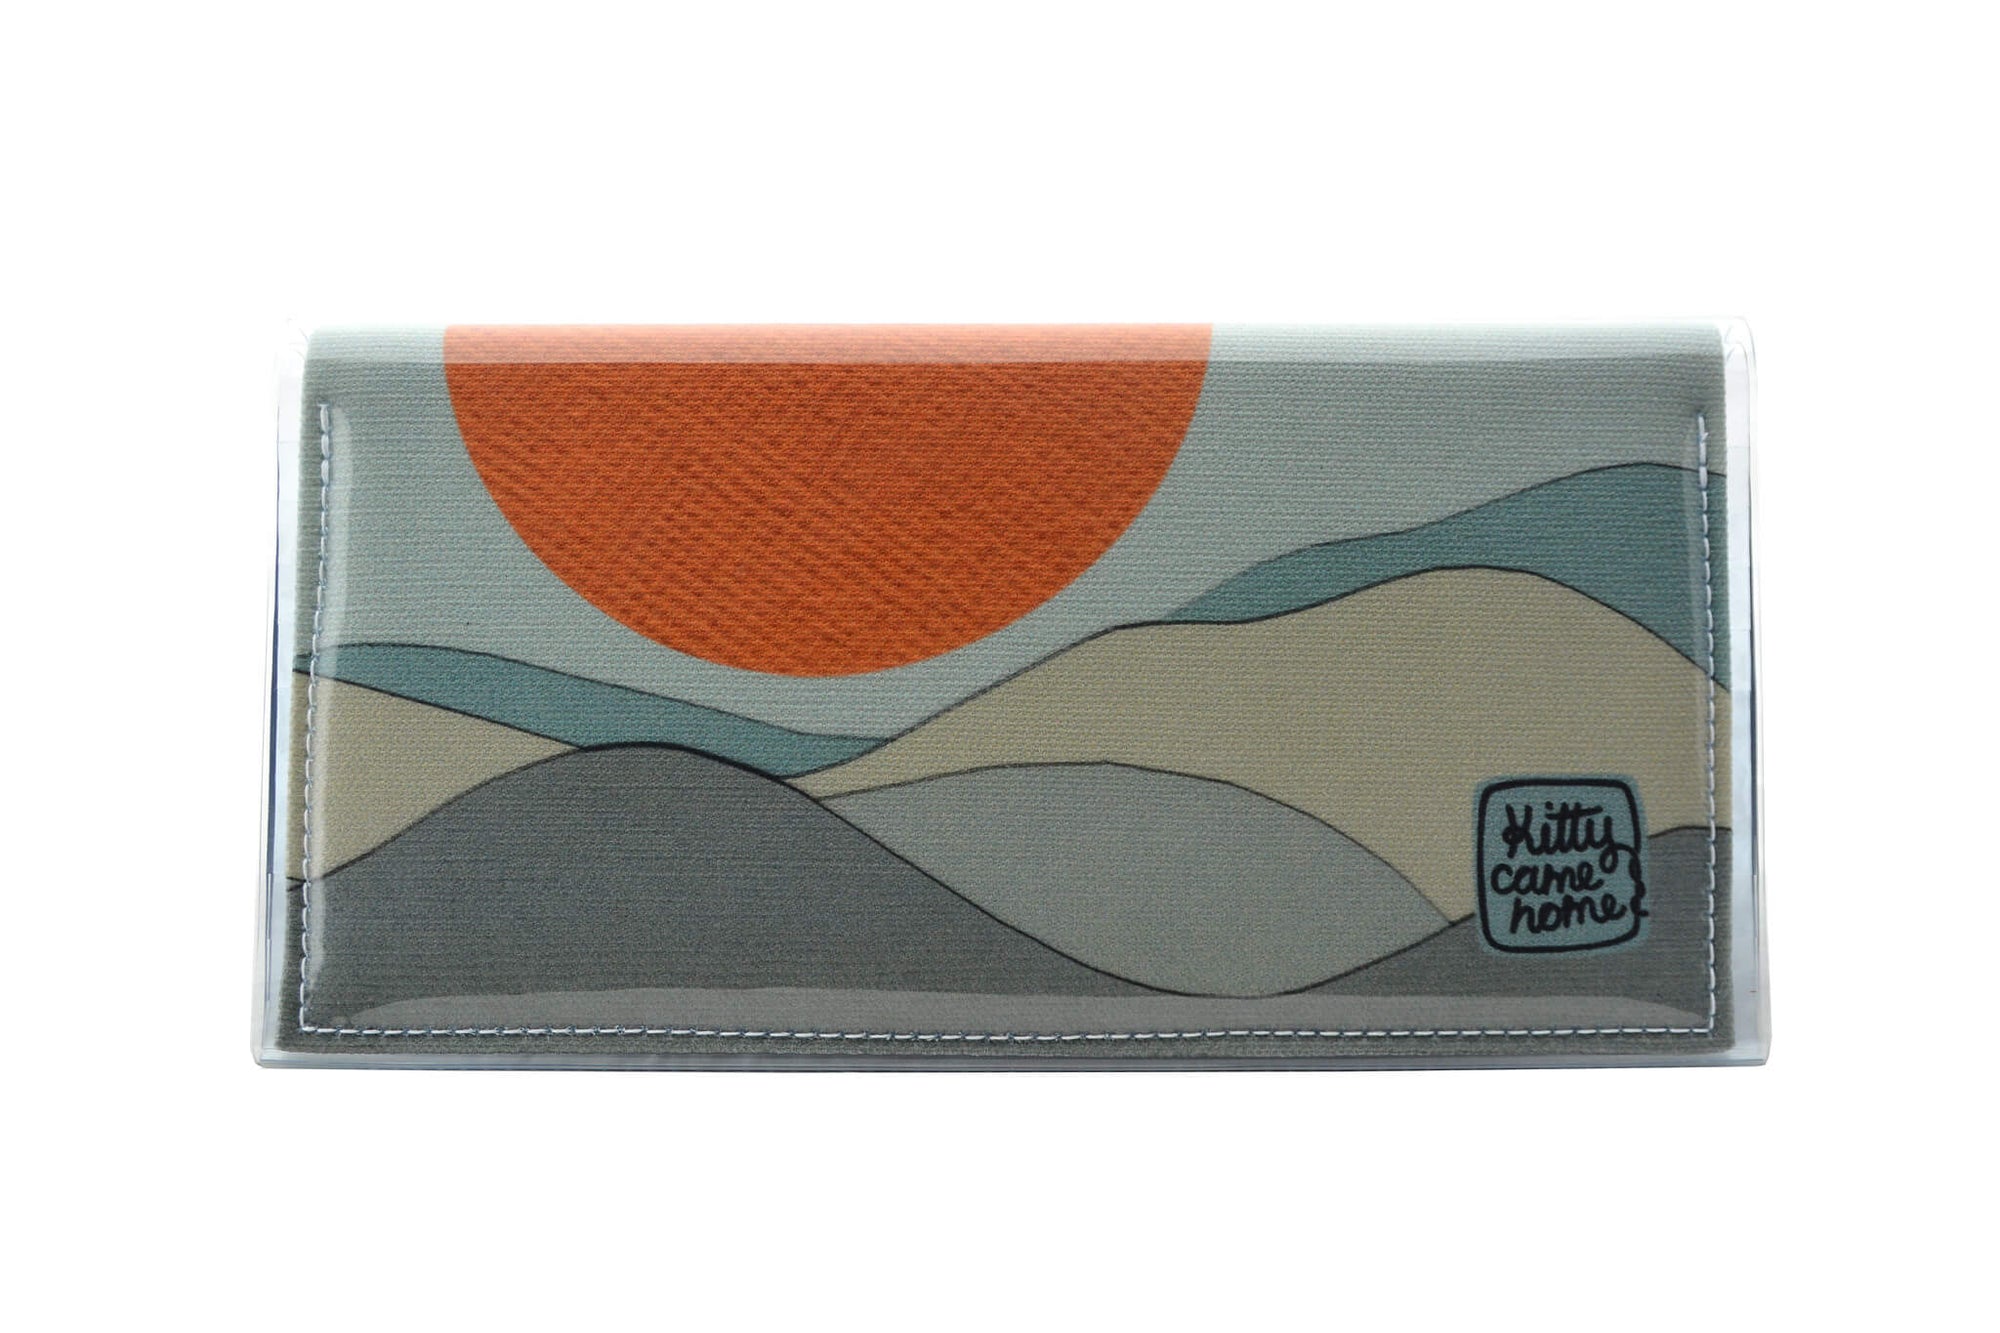 This is an image of the front of a Kitty Came Home bifold purse clutch in 'The night grows pale' design by Satin and Tat. An orange moon floats above a pale landscape. This is the large size.